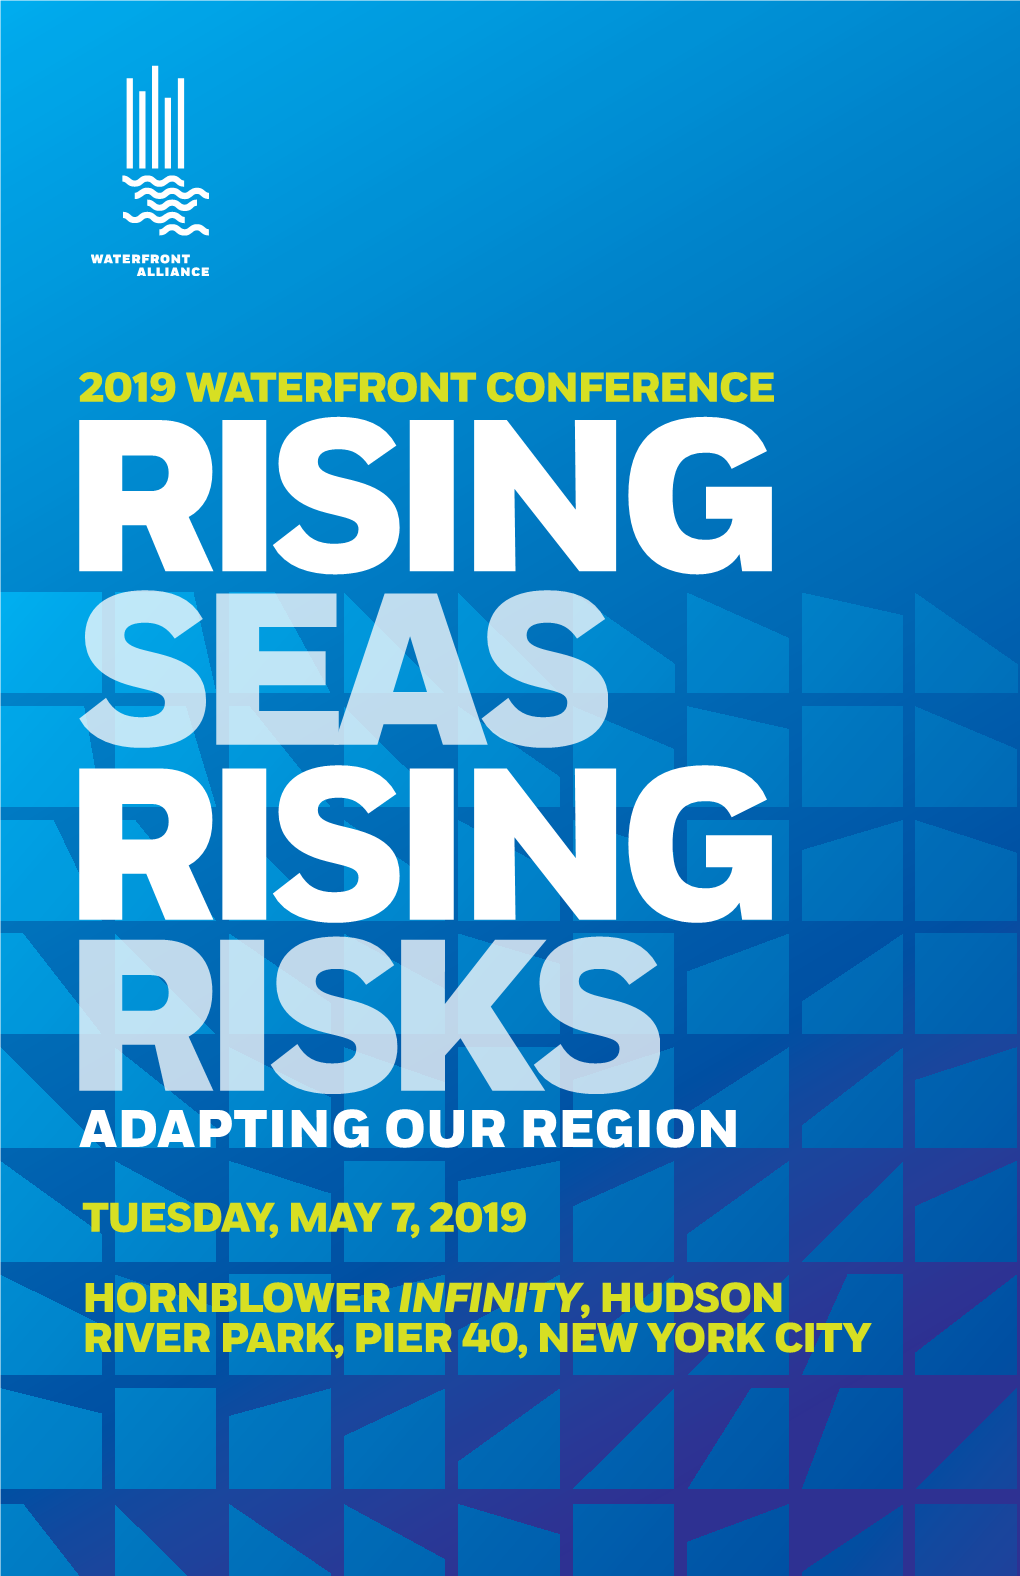 Waterfront Conference Tuesday, May , Hornblower